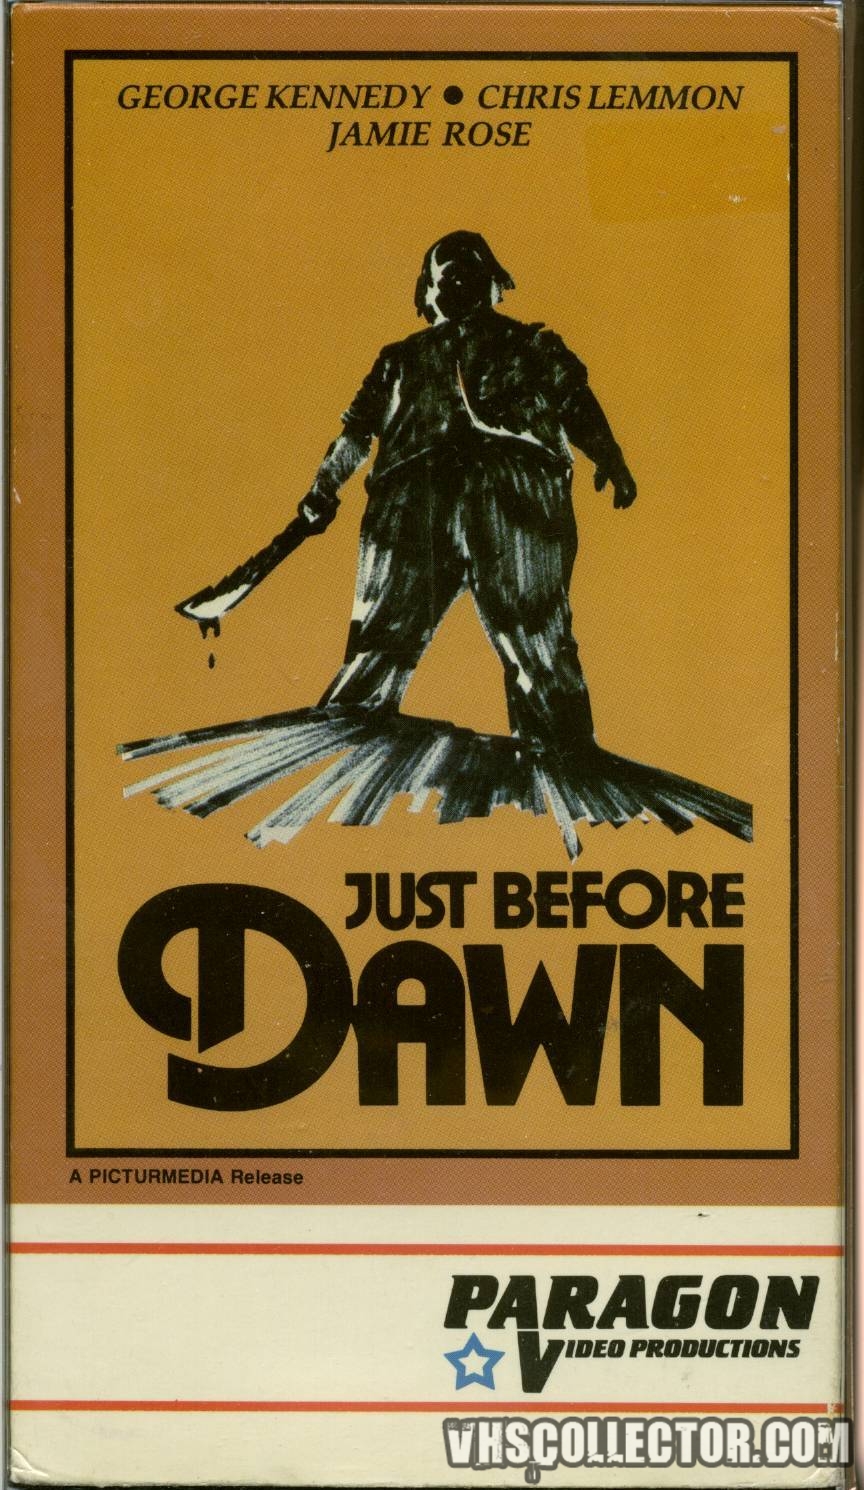 Just Before Dawn | VHSCollector.com